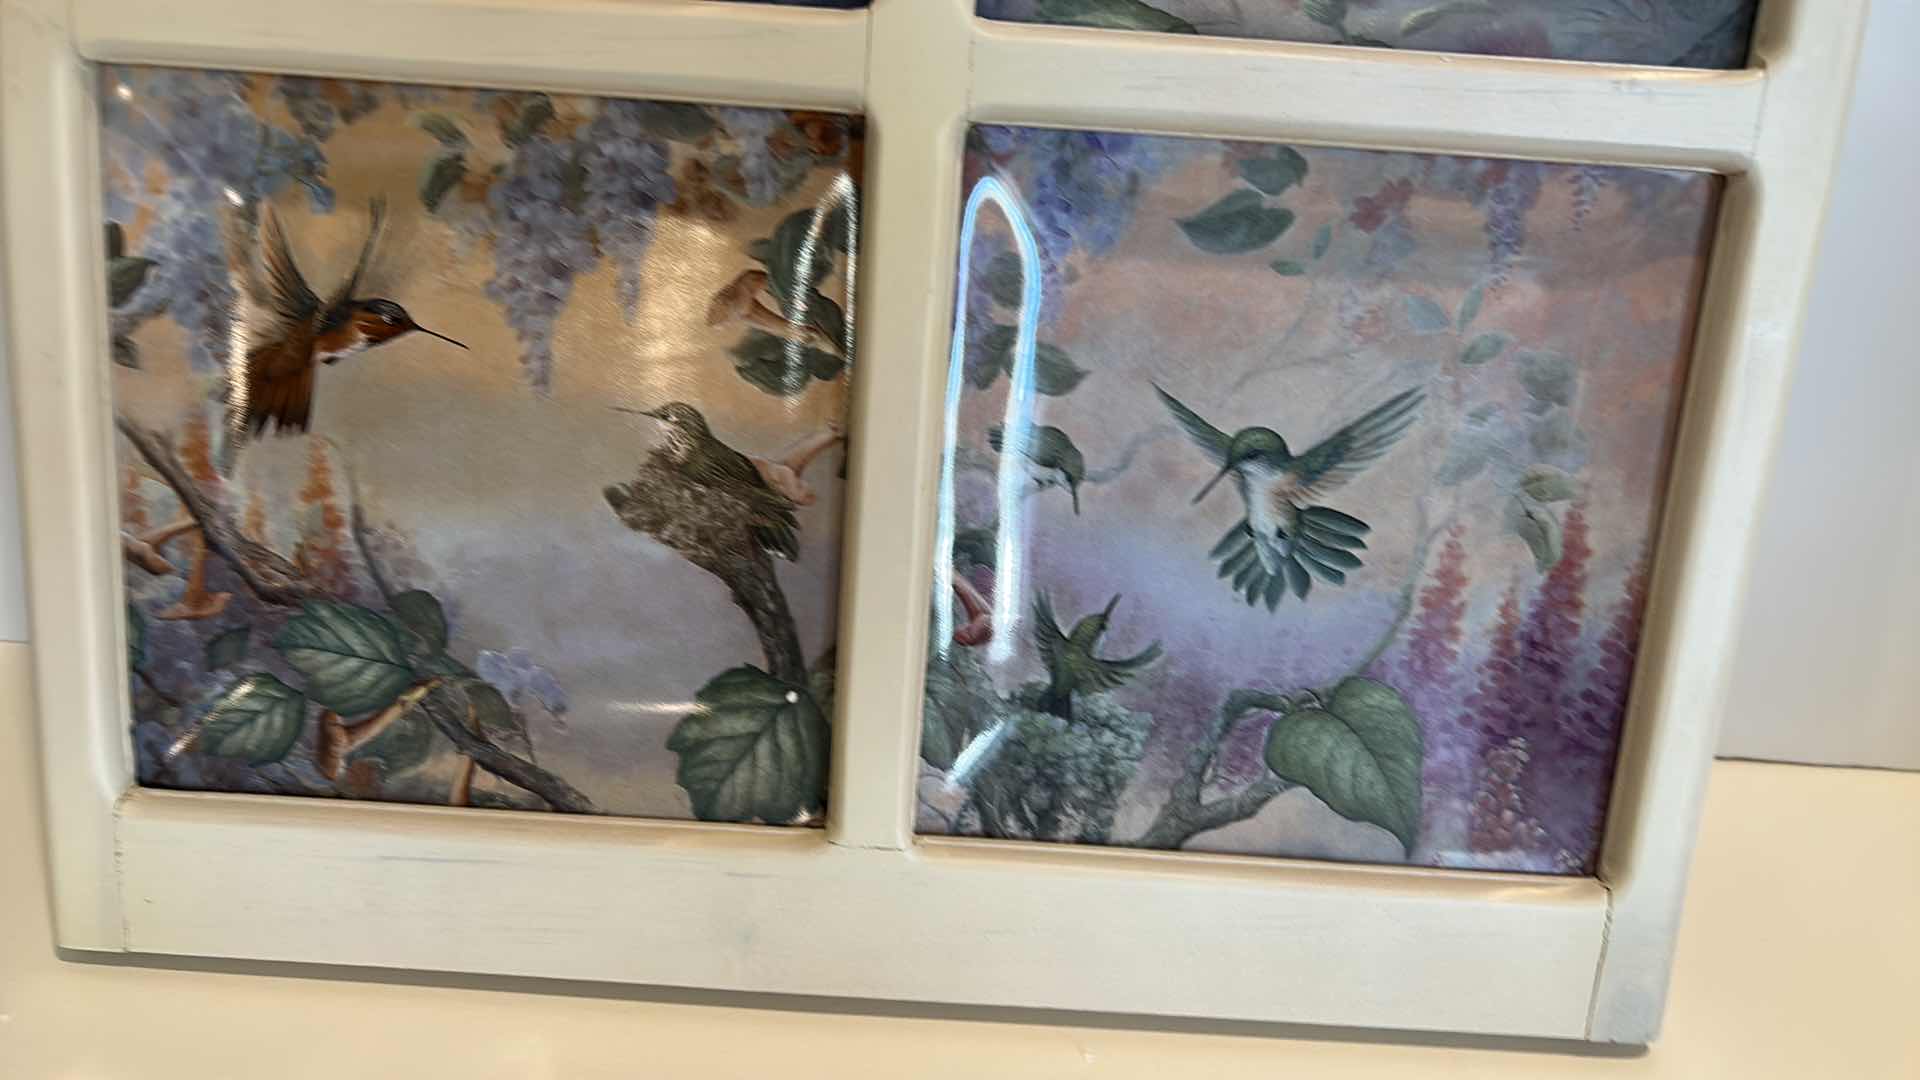 Photo 2 of WINDOW PANE WITH 6 COLLECTIBLE PORCELAIN “A GARDEN OF LITTLE JEWELS” PLATES NUMBERED BY LARRY MARTIN 14 1/4” x 22 1/4”